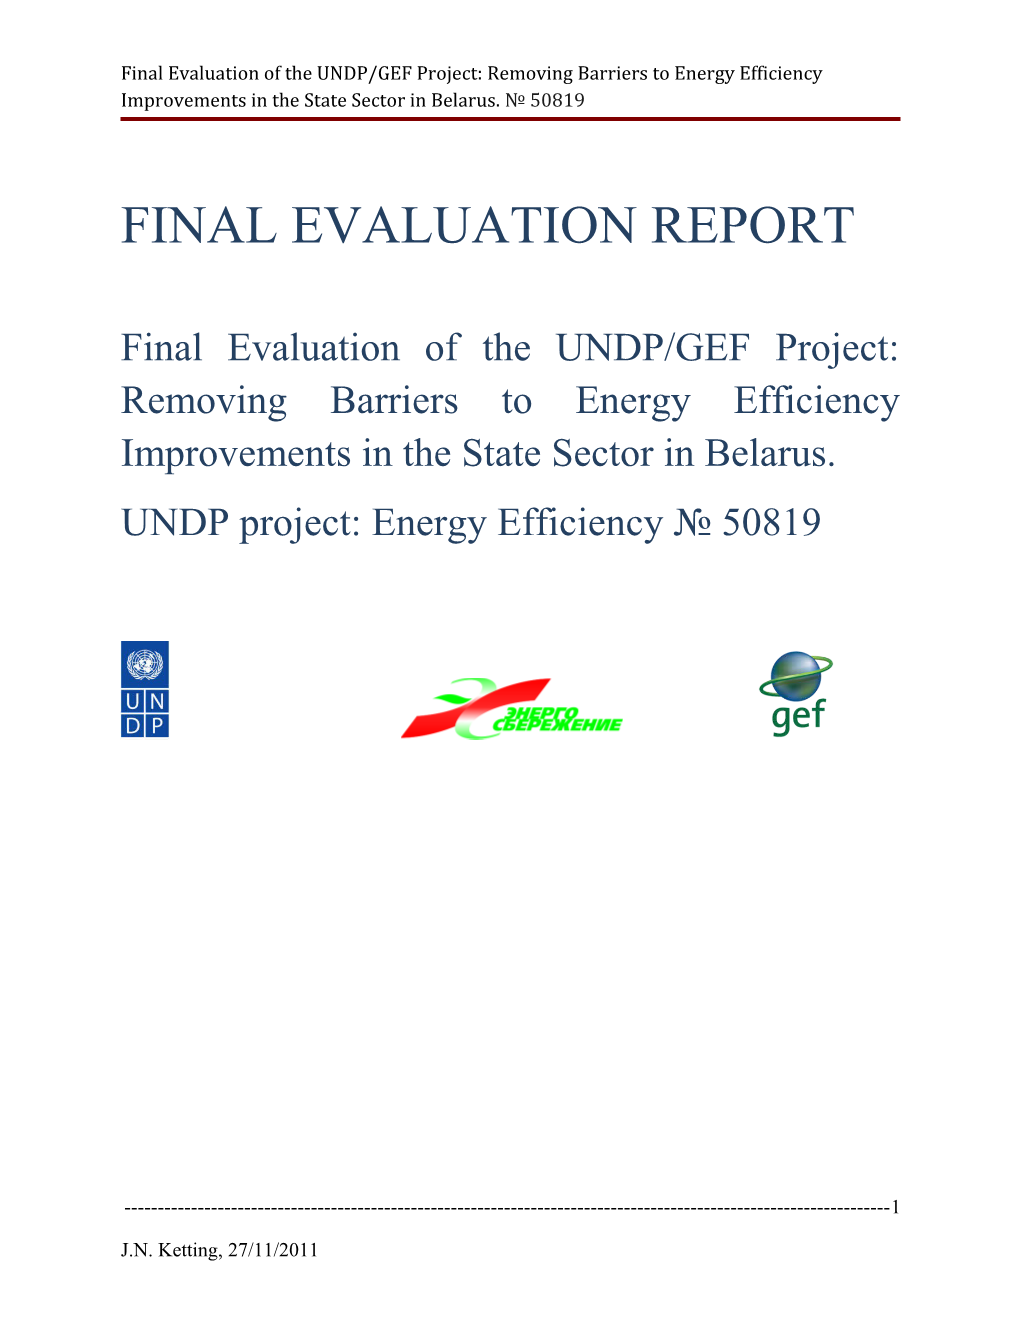 Final Evaluation of the UNDP/GEF Project: Removing Barriers to Energy Efficiency Improvements